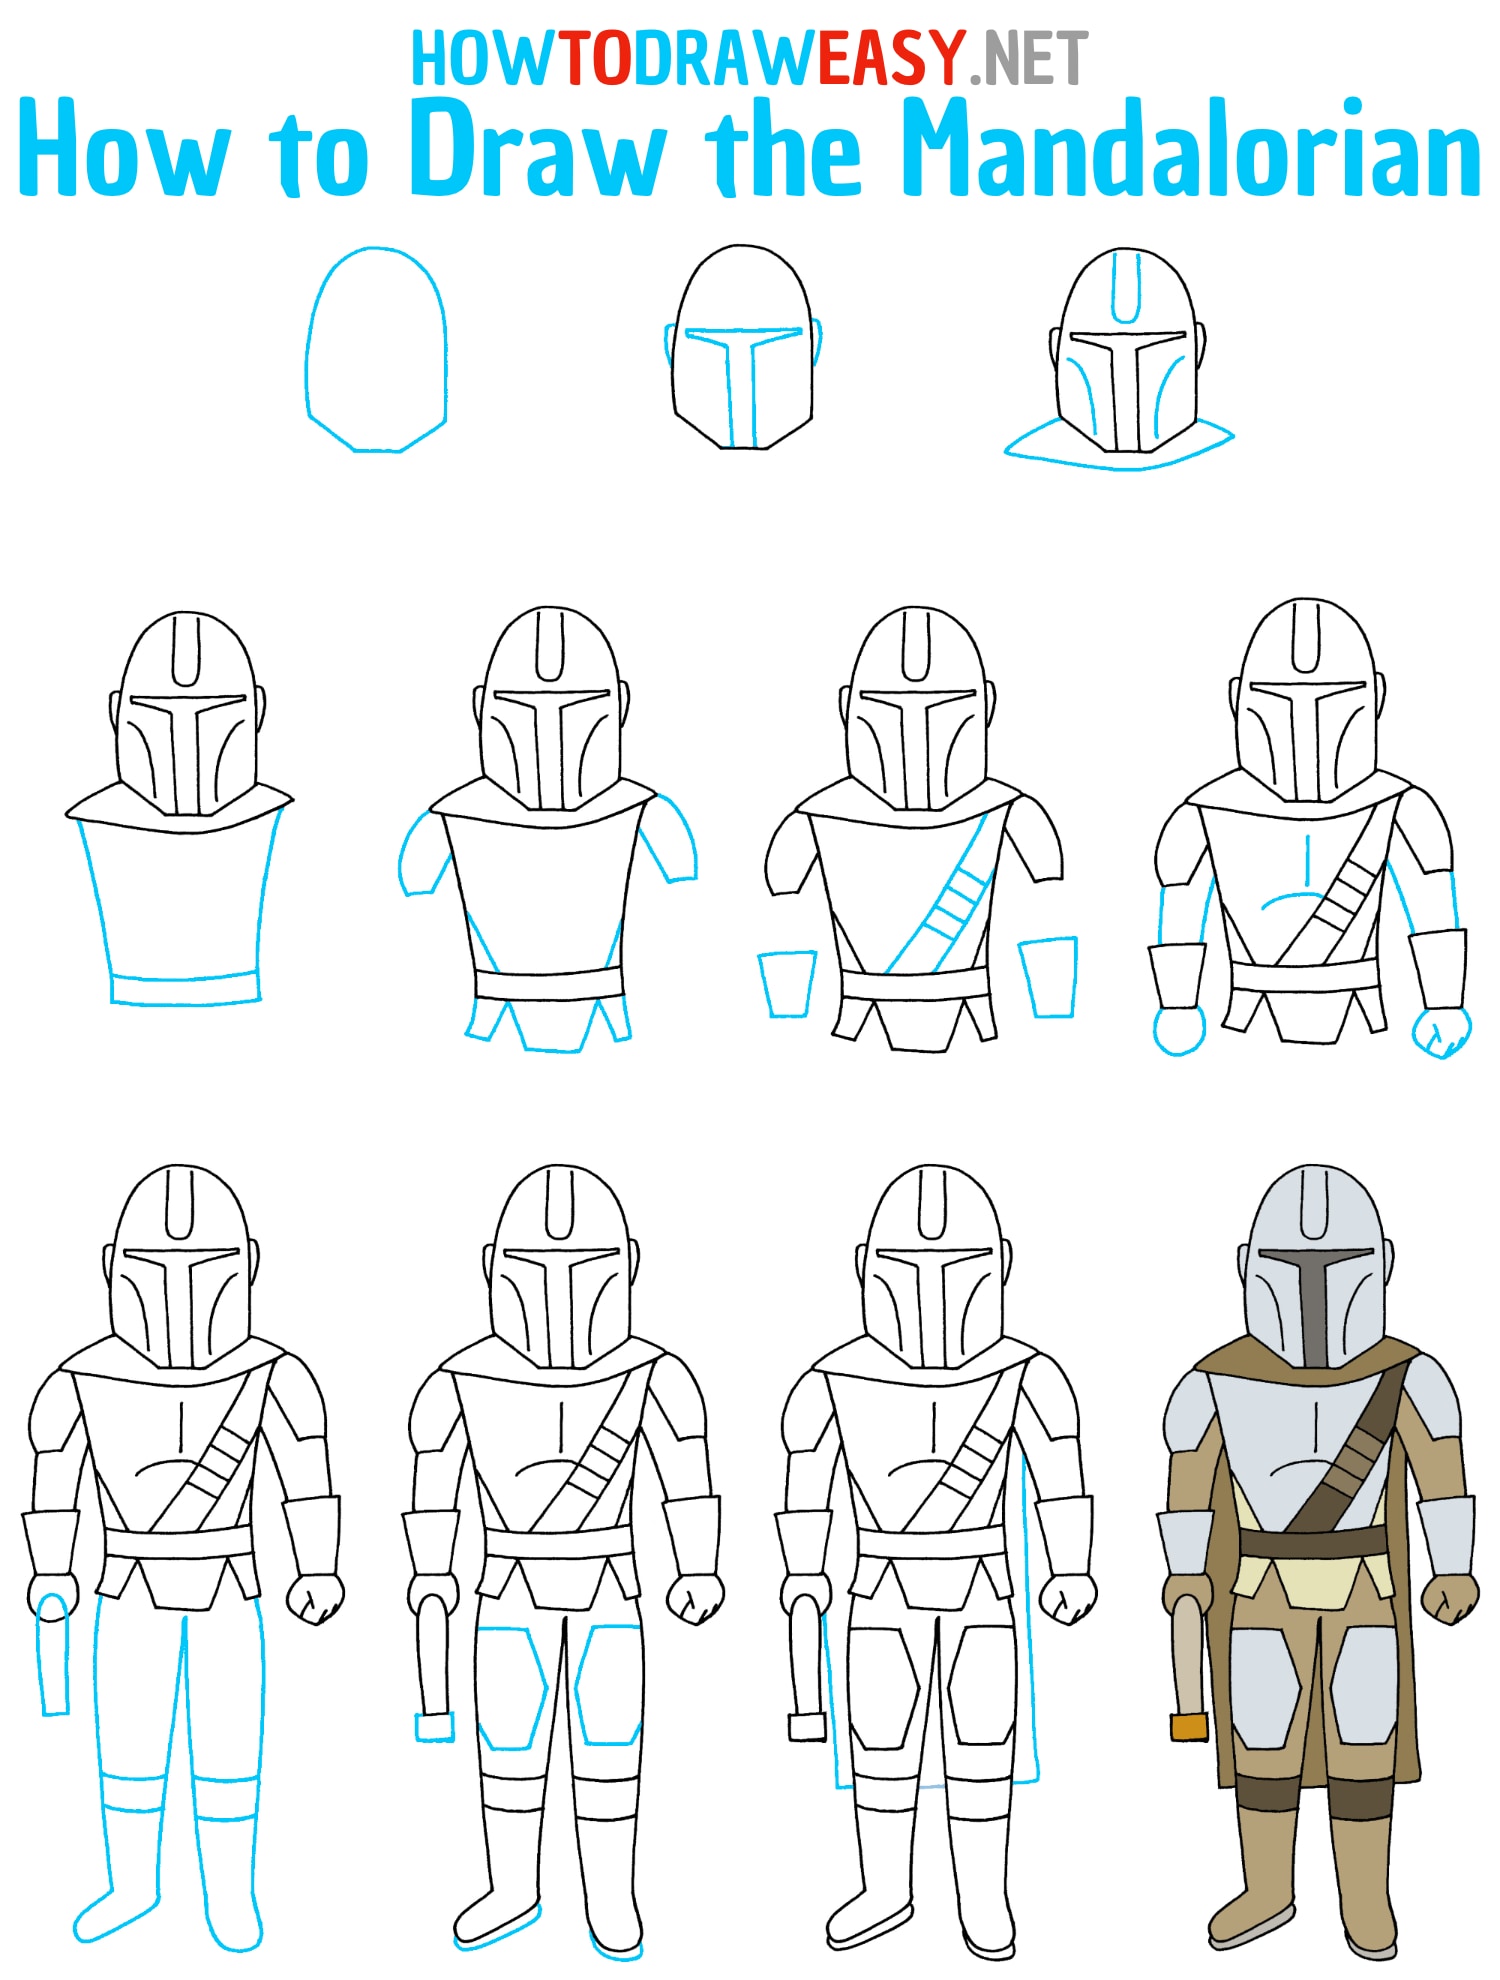 How to Draw the Mandalorian Step by Step